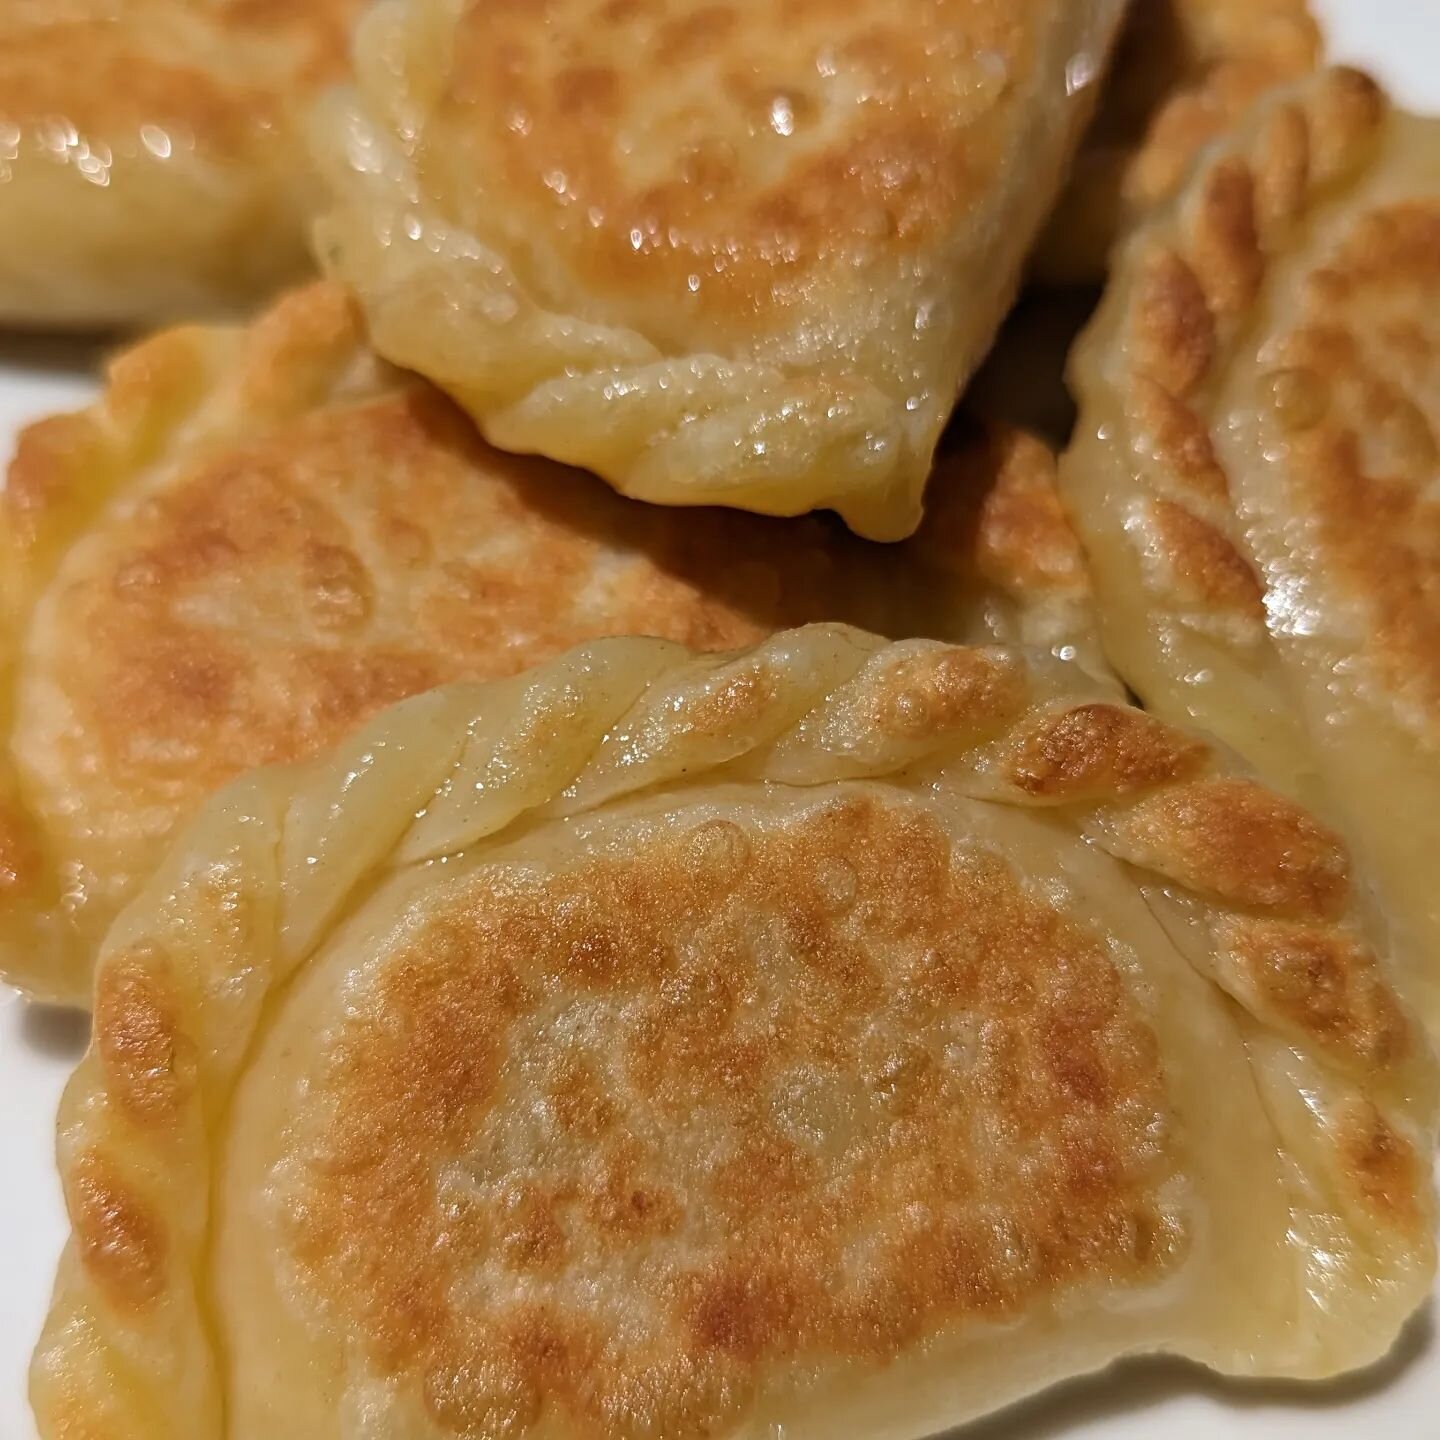 Happy Monday! Hope everyone had a great weekend. We'll have more pierogi and pickles this Saturday at @pdfarmersmarket. Feel free to pre-order on the website (link in bio) to guarantee the flavor you'd like to enjoy with dinner. Can't wait to see y'a